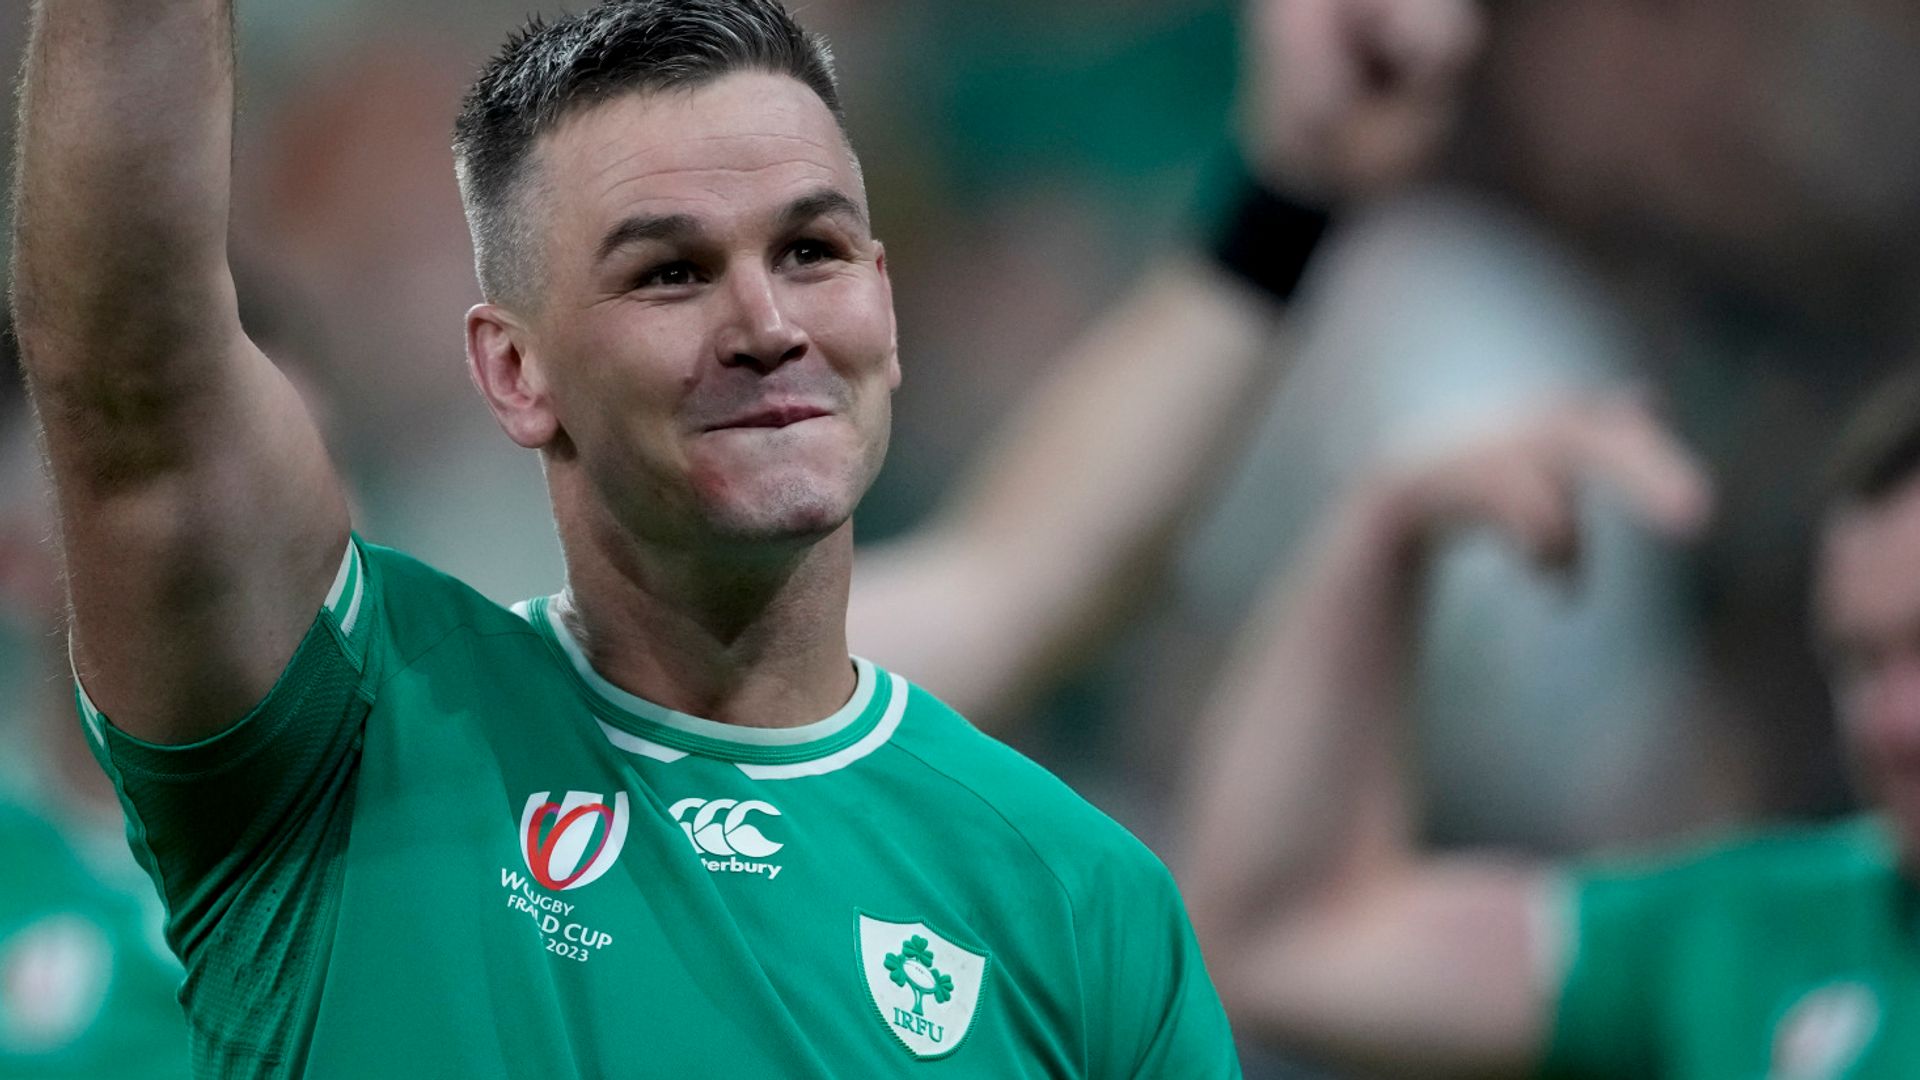 Sexton: Ireland need to make win over South Africa count